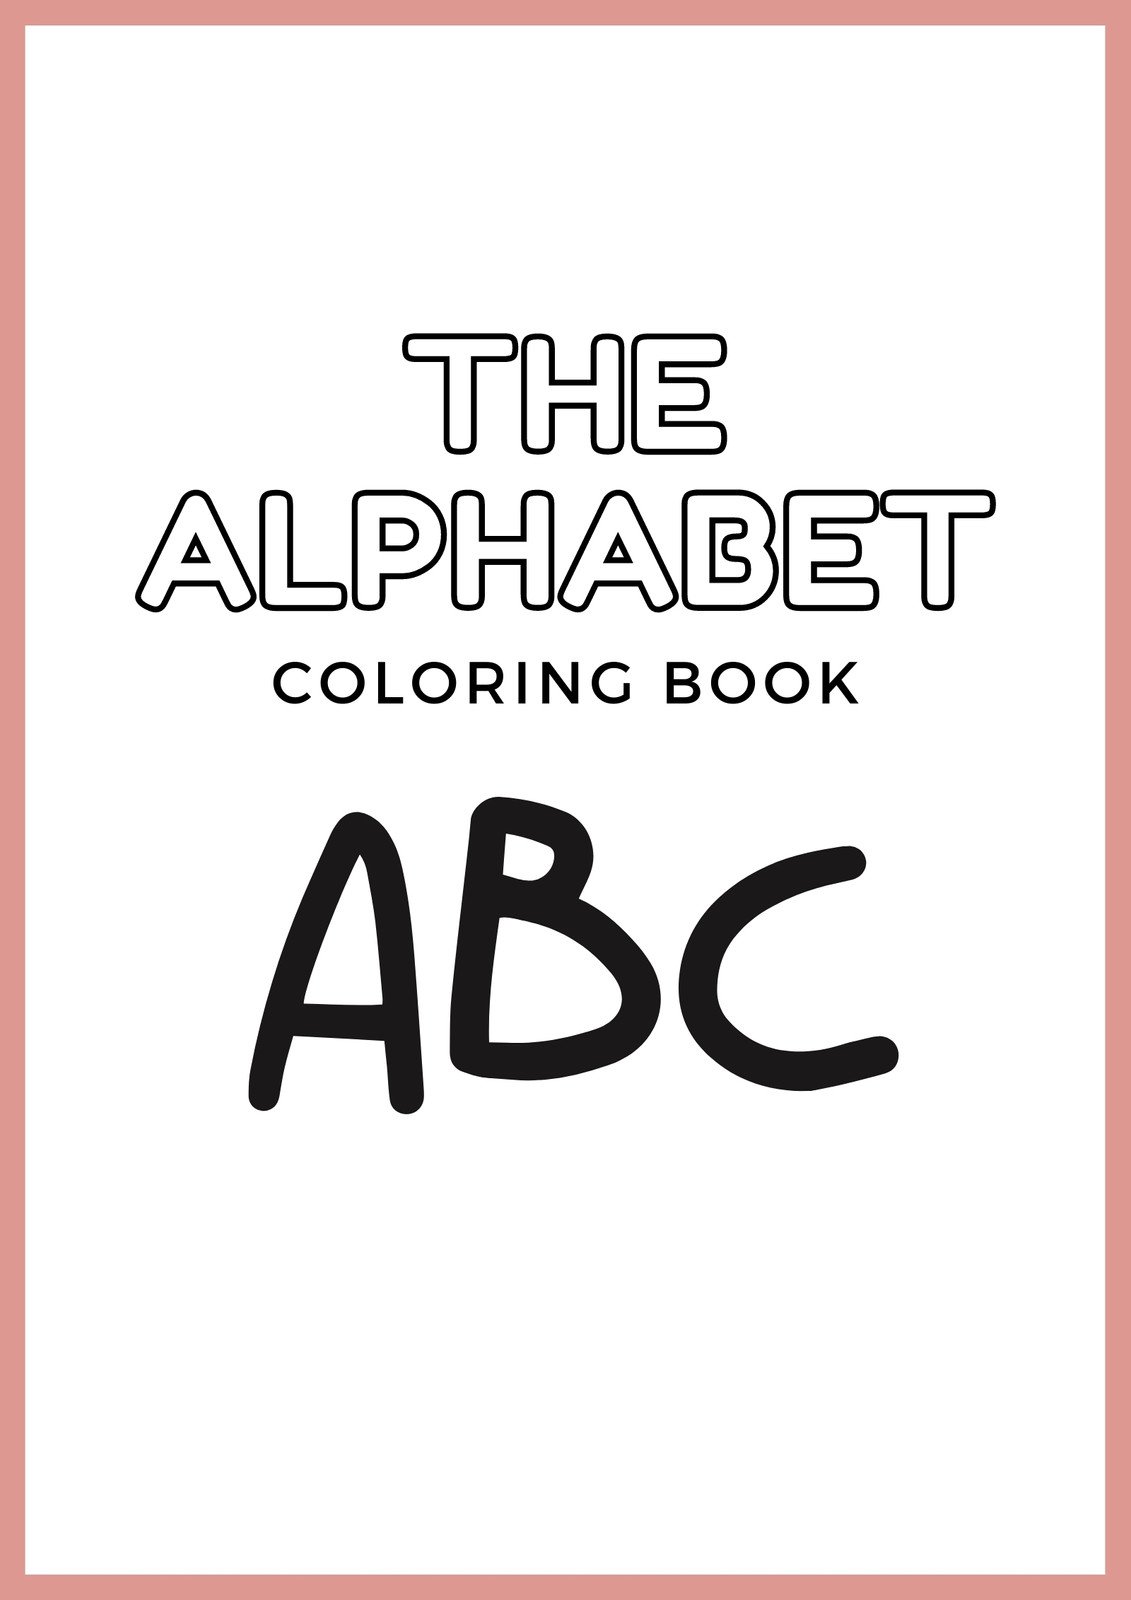 Creative and Tech-Free Fun for Kids with Personalized Coloring